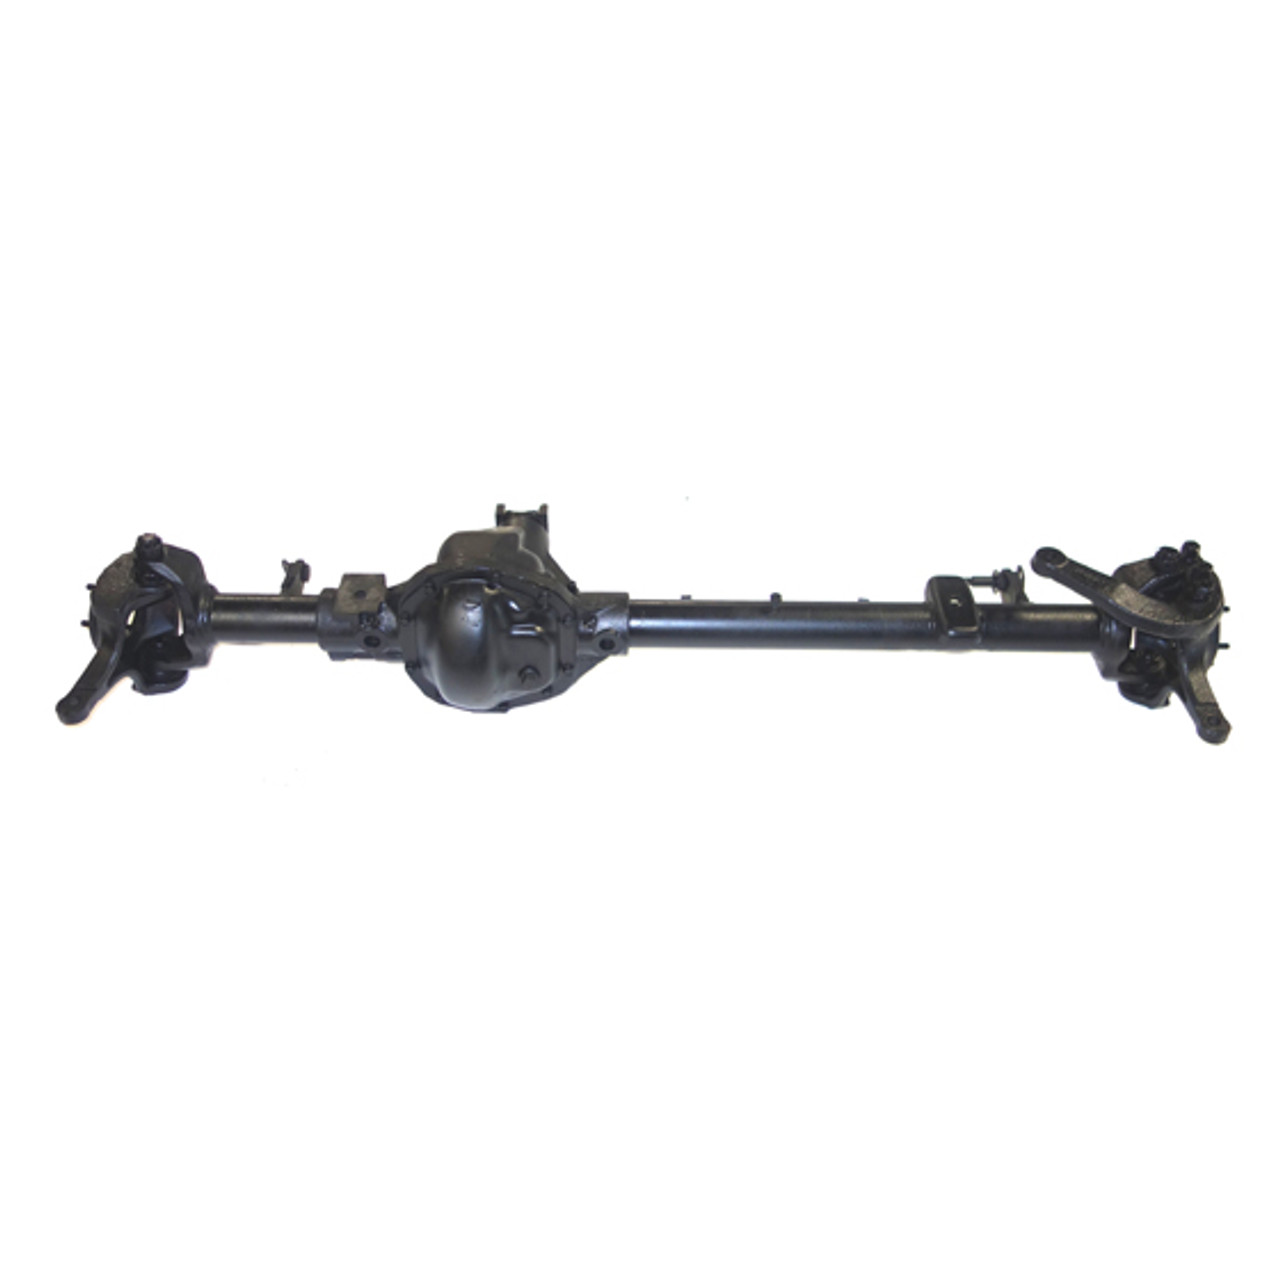 Reman Complete Axle Assembly for Dana 44 89-93 Dodge W250 4.11 Ratio with Vacuum Disconnect